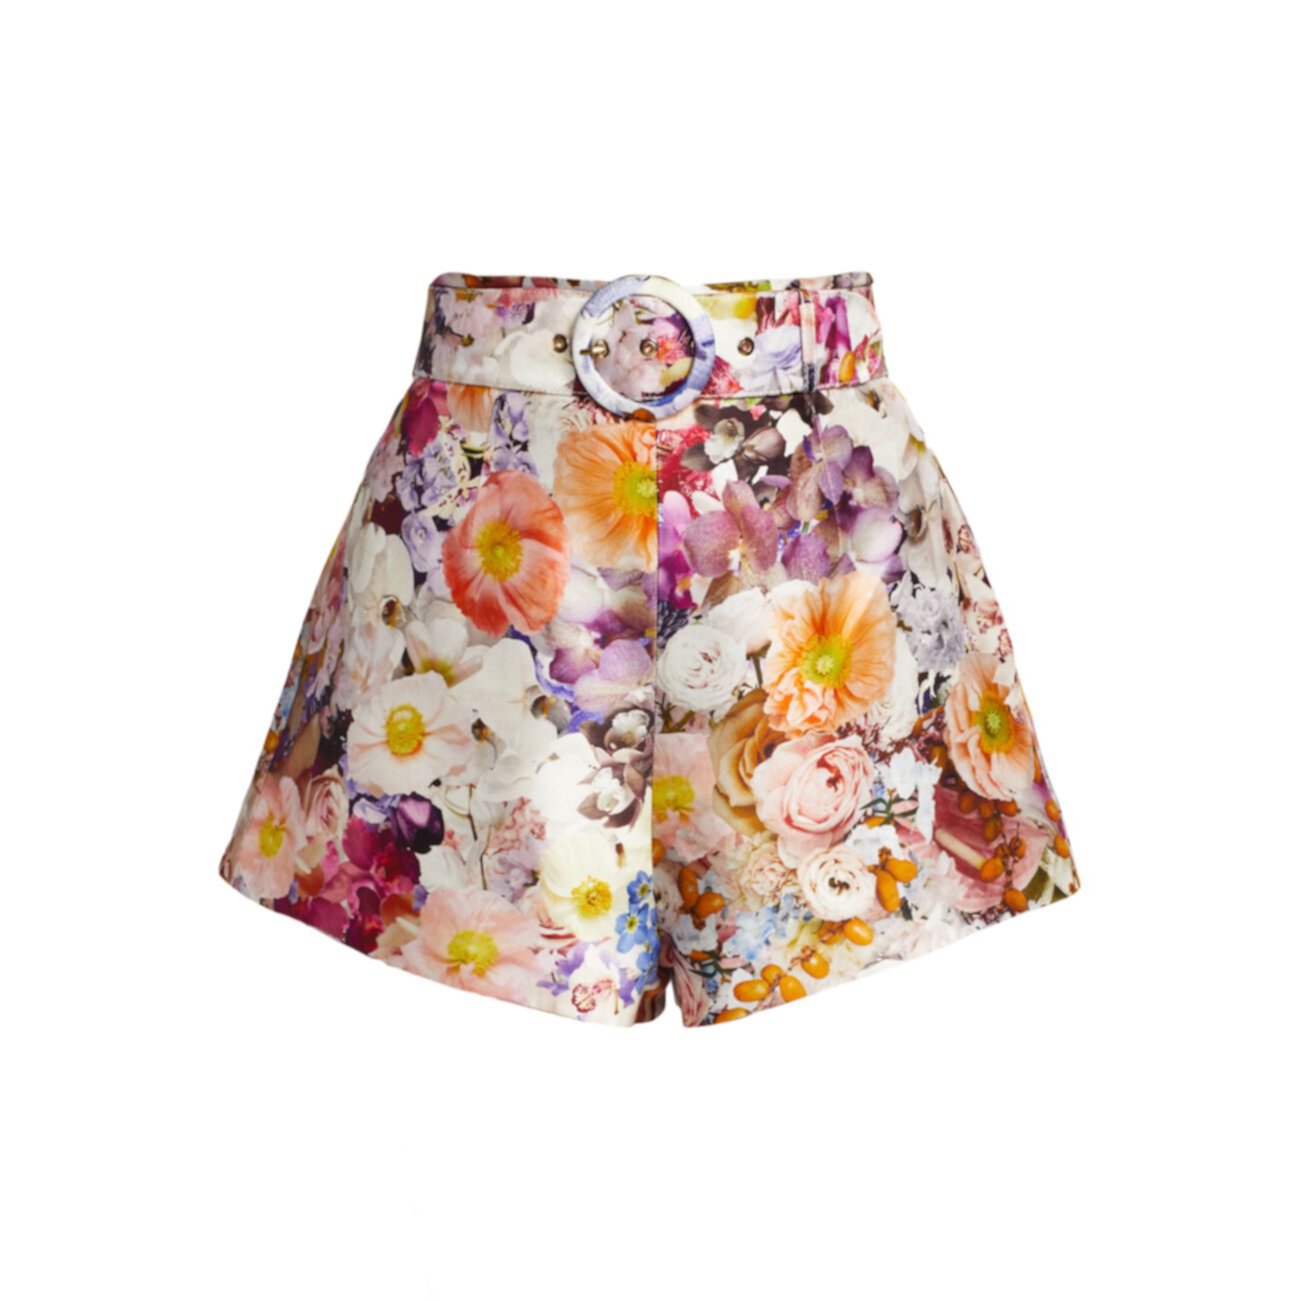 Prima Belted Floral High-Waisted Shorts ZIMMERMANN